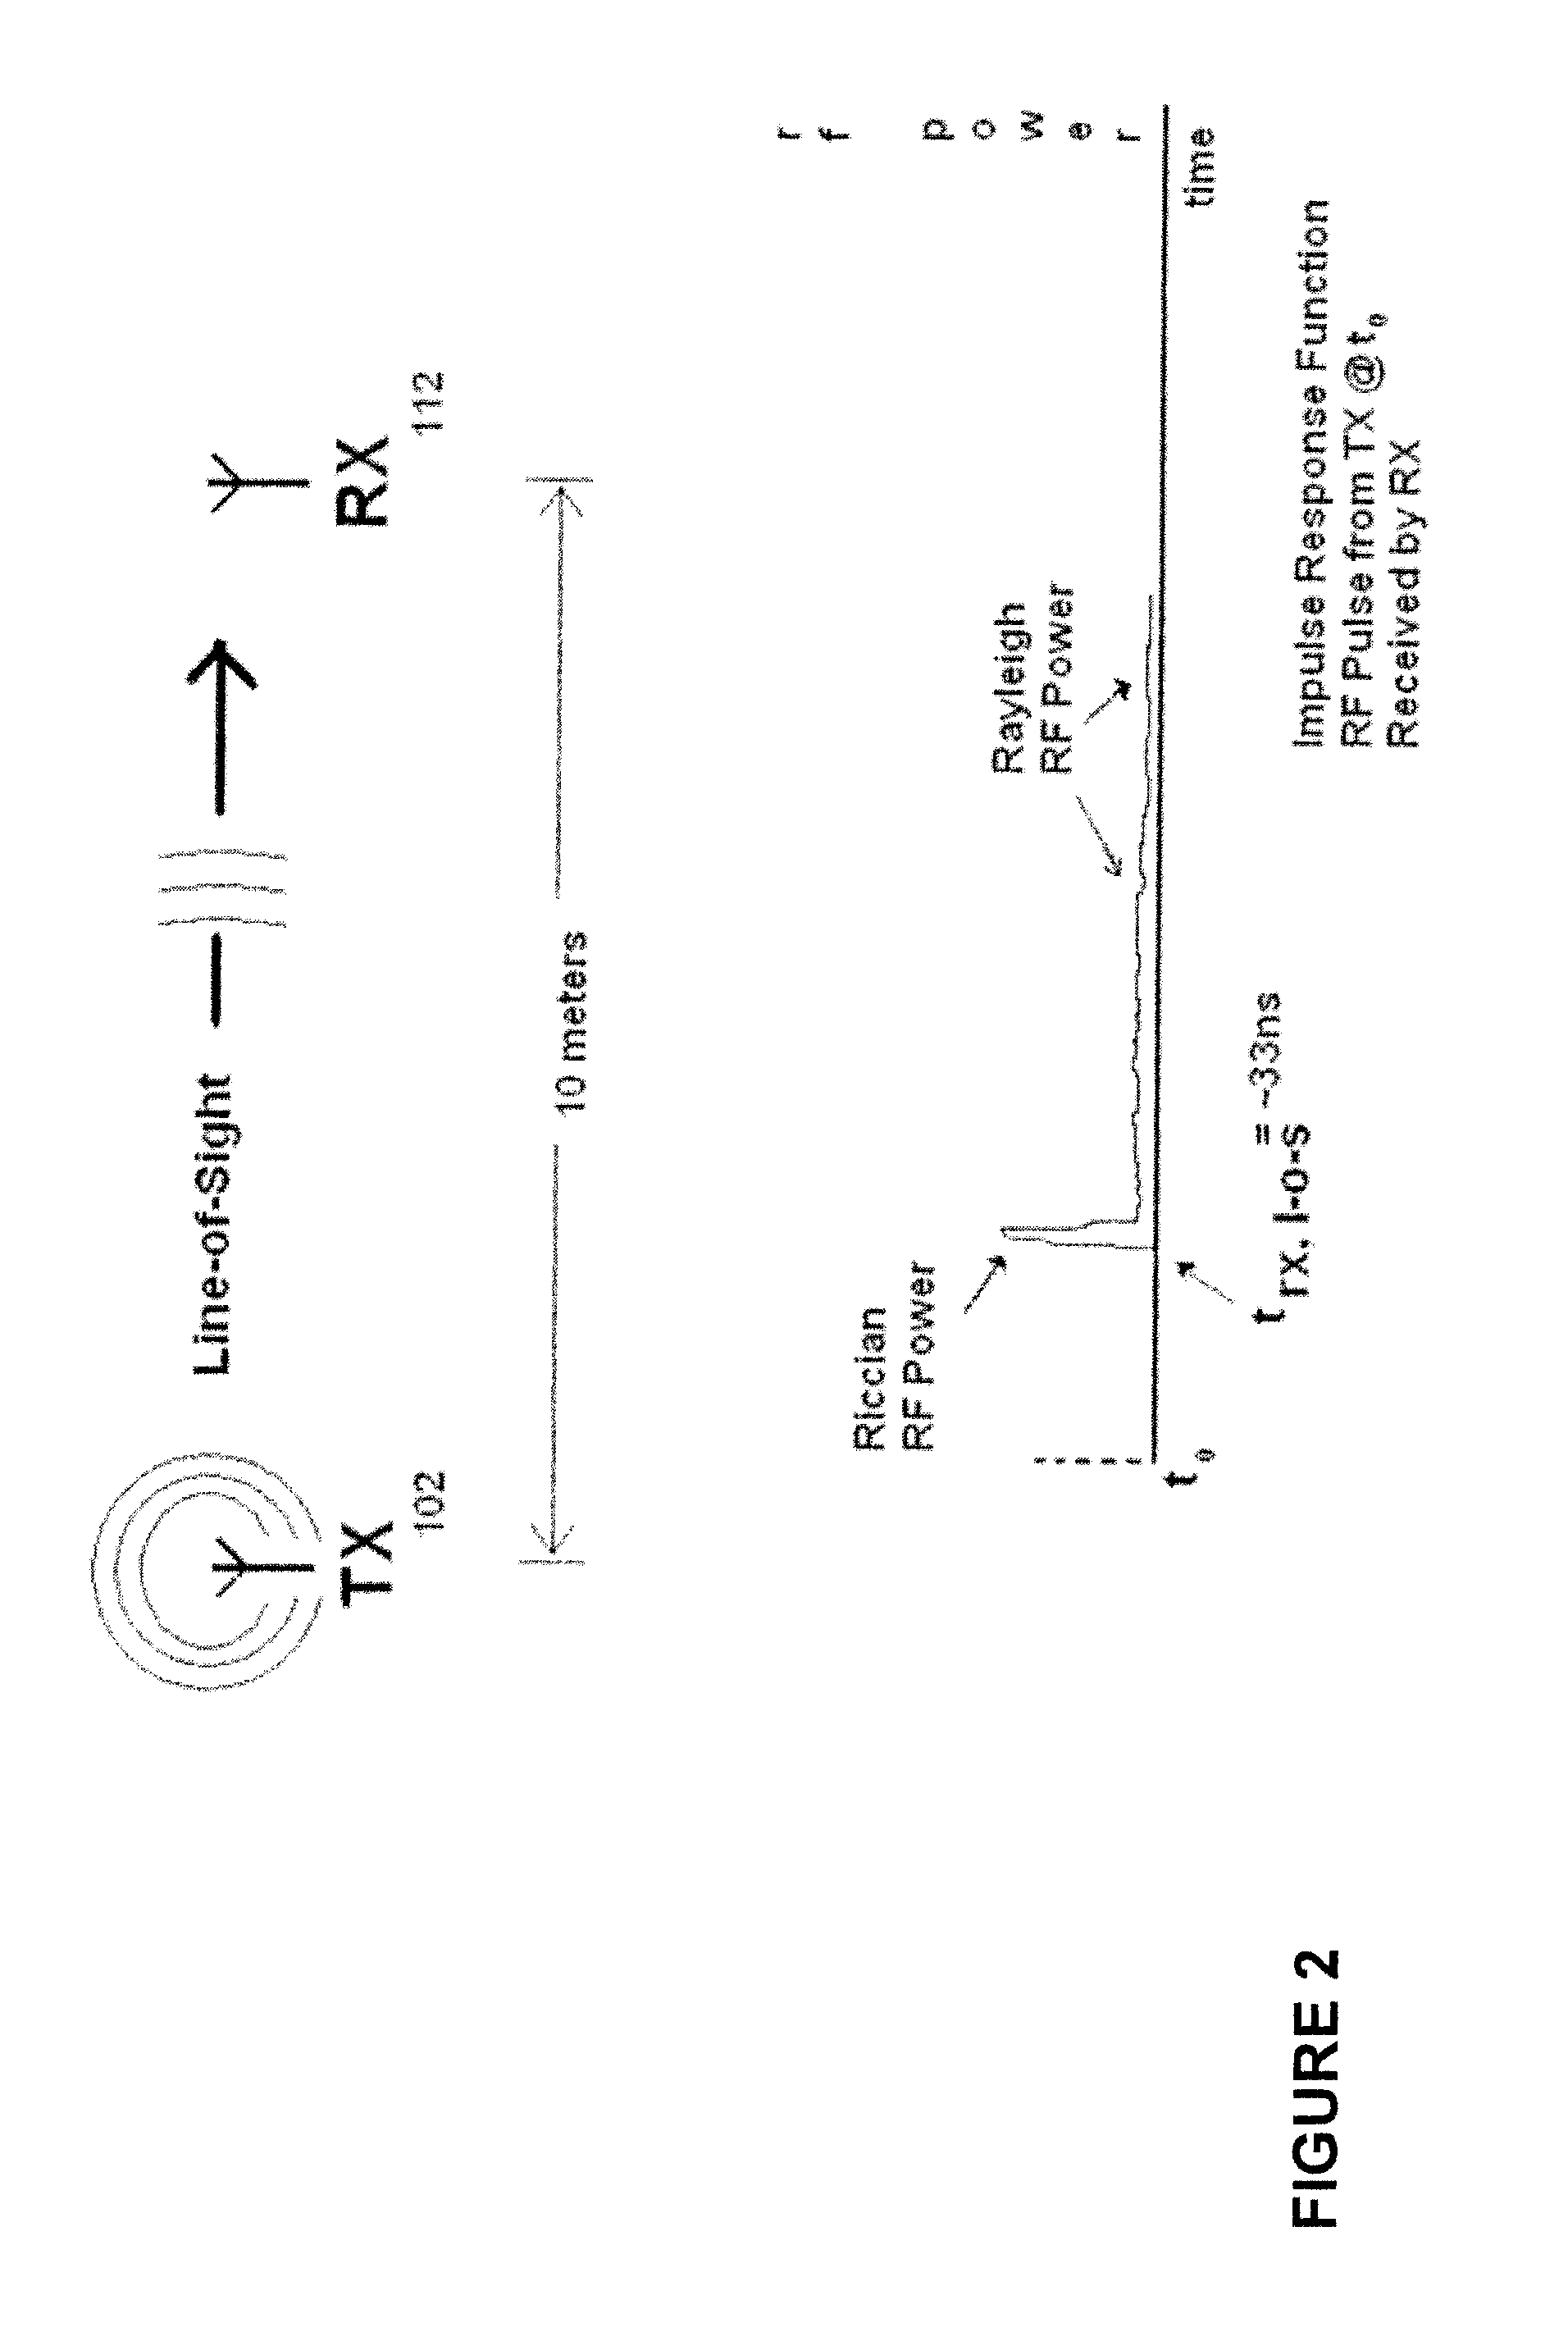 Multipath compensation within geolocation of mobile devices